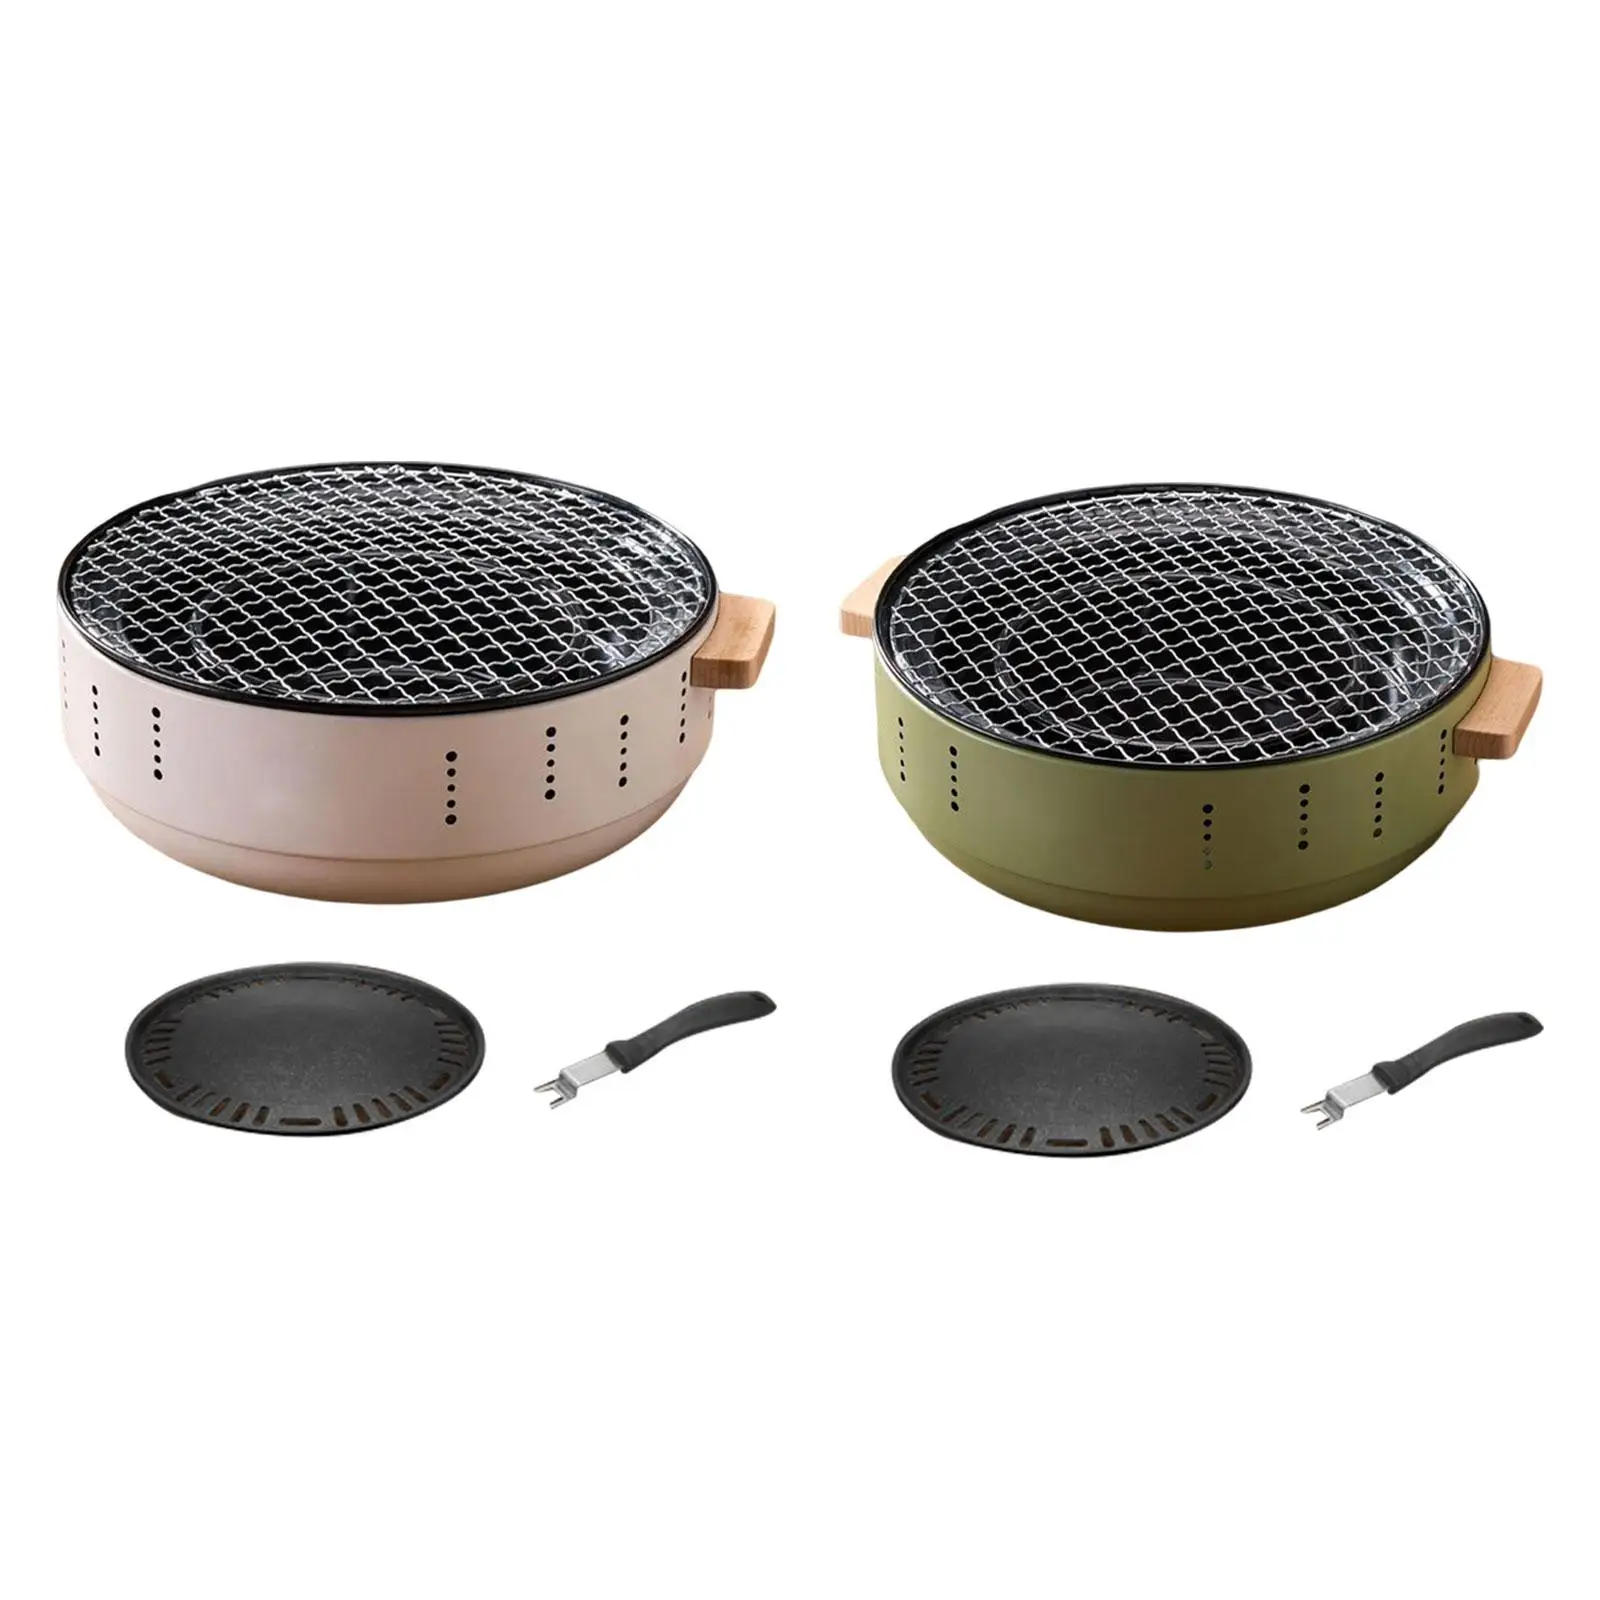 Portable Barbecue Grill Bakeware Lightweight Multifunctional for Outdoor Indoor Backpacking